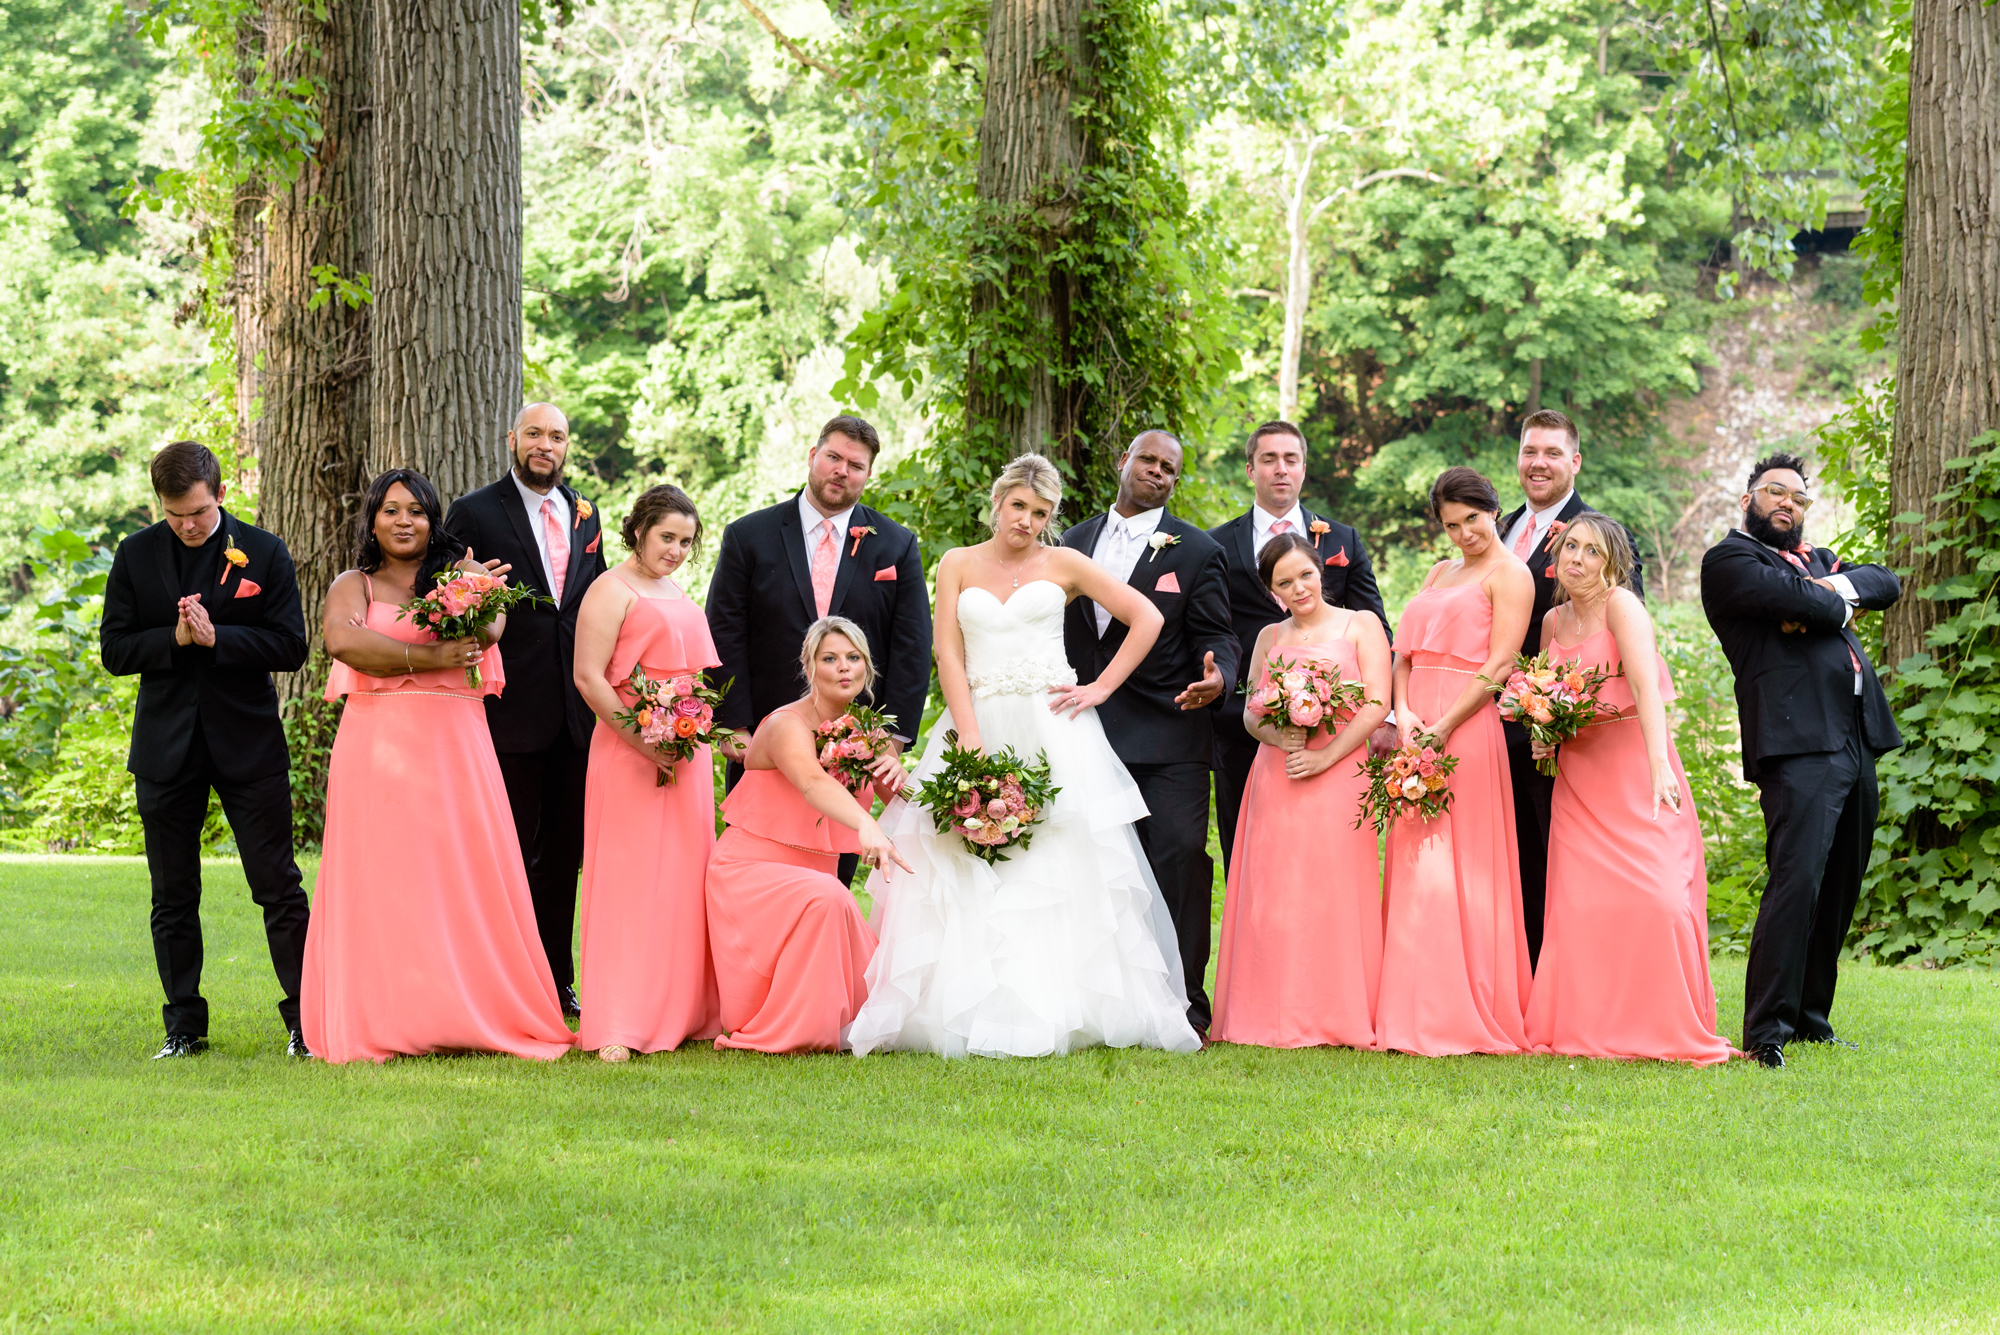 Bridal Party after a wedding ceremony at Leeper Park